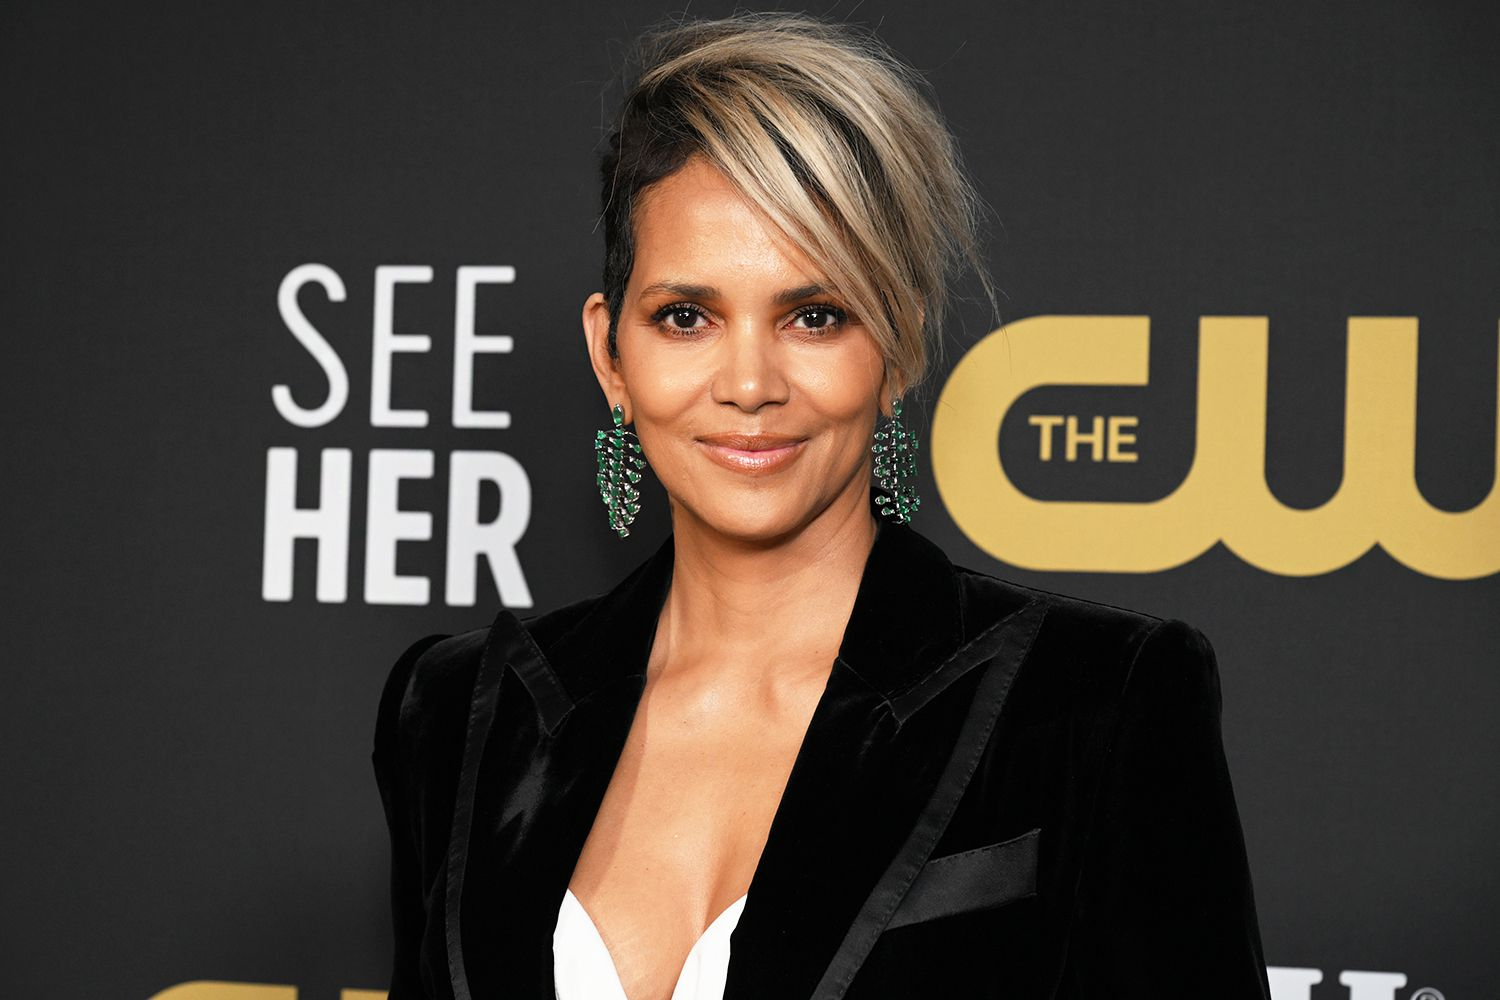 Halle Berry Bares It All With A Glass Of Wine In Hand, Breaking The Internet With Her Sultry Bank Holiday Balcony Pose!